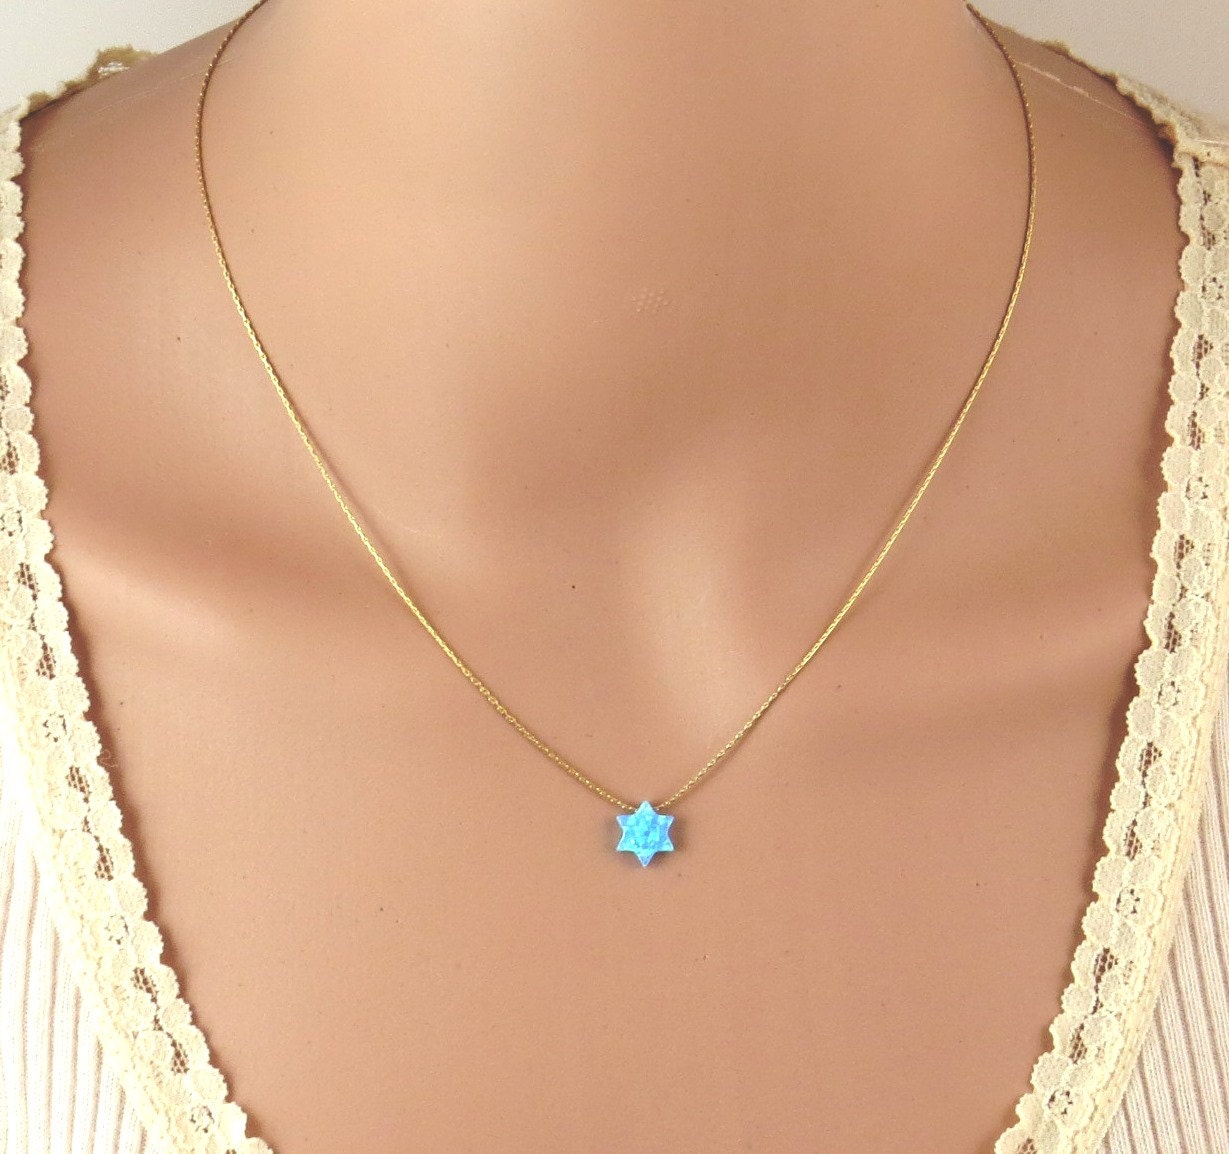 opal necklace gold necklace Jewish necklace Jewish jewelry 14k gold filled chain Star of David necklace Star of David opal jewelry